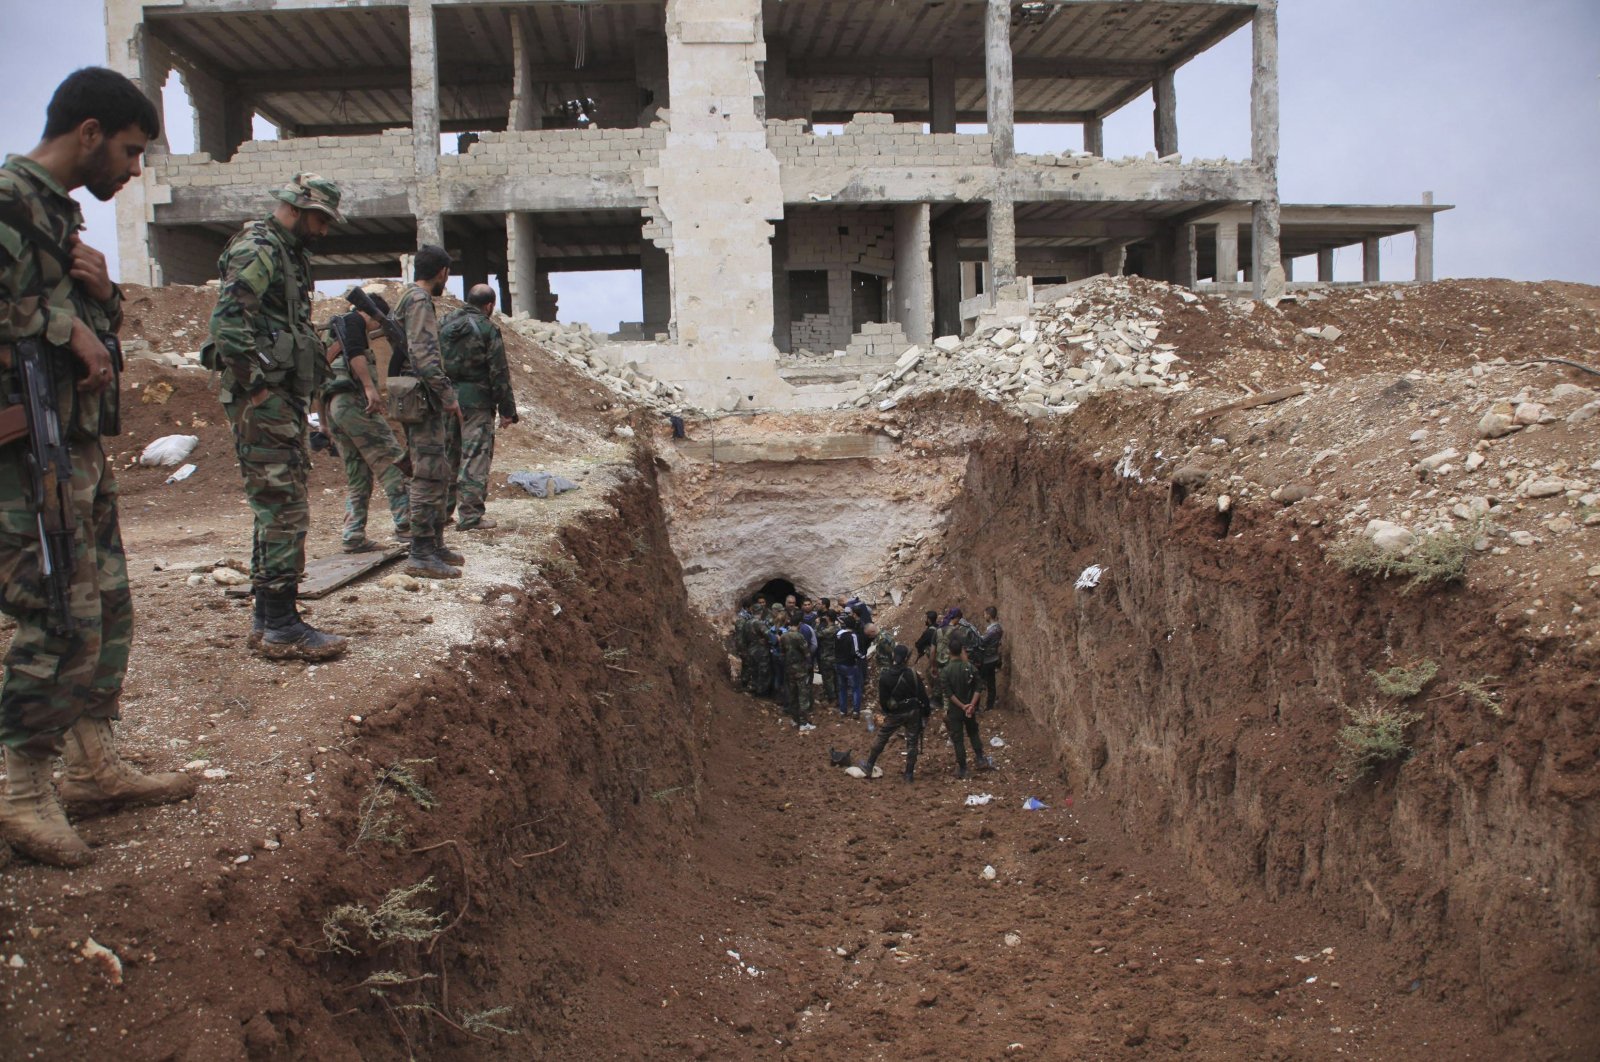 Assad regime forces stand in a trench near a glass factory after regaining control of the area, northeast Aleppo, Syria, Oct.19, 2014. (Reuters File Photo)